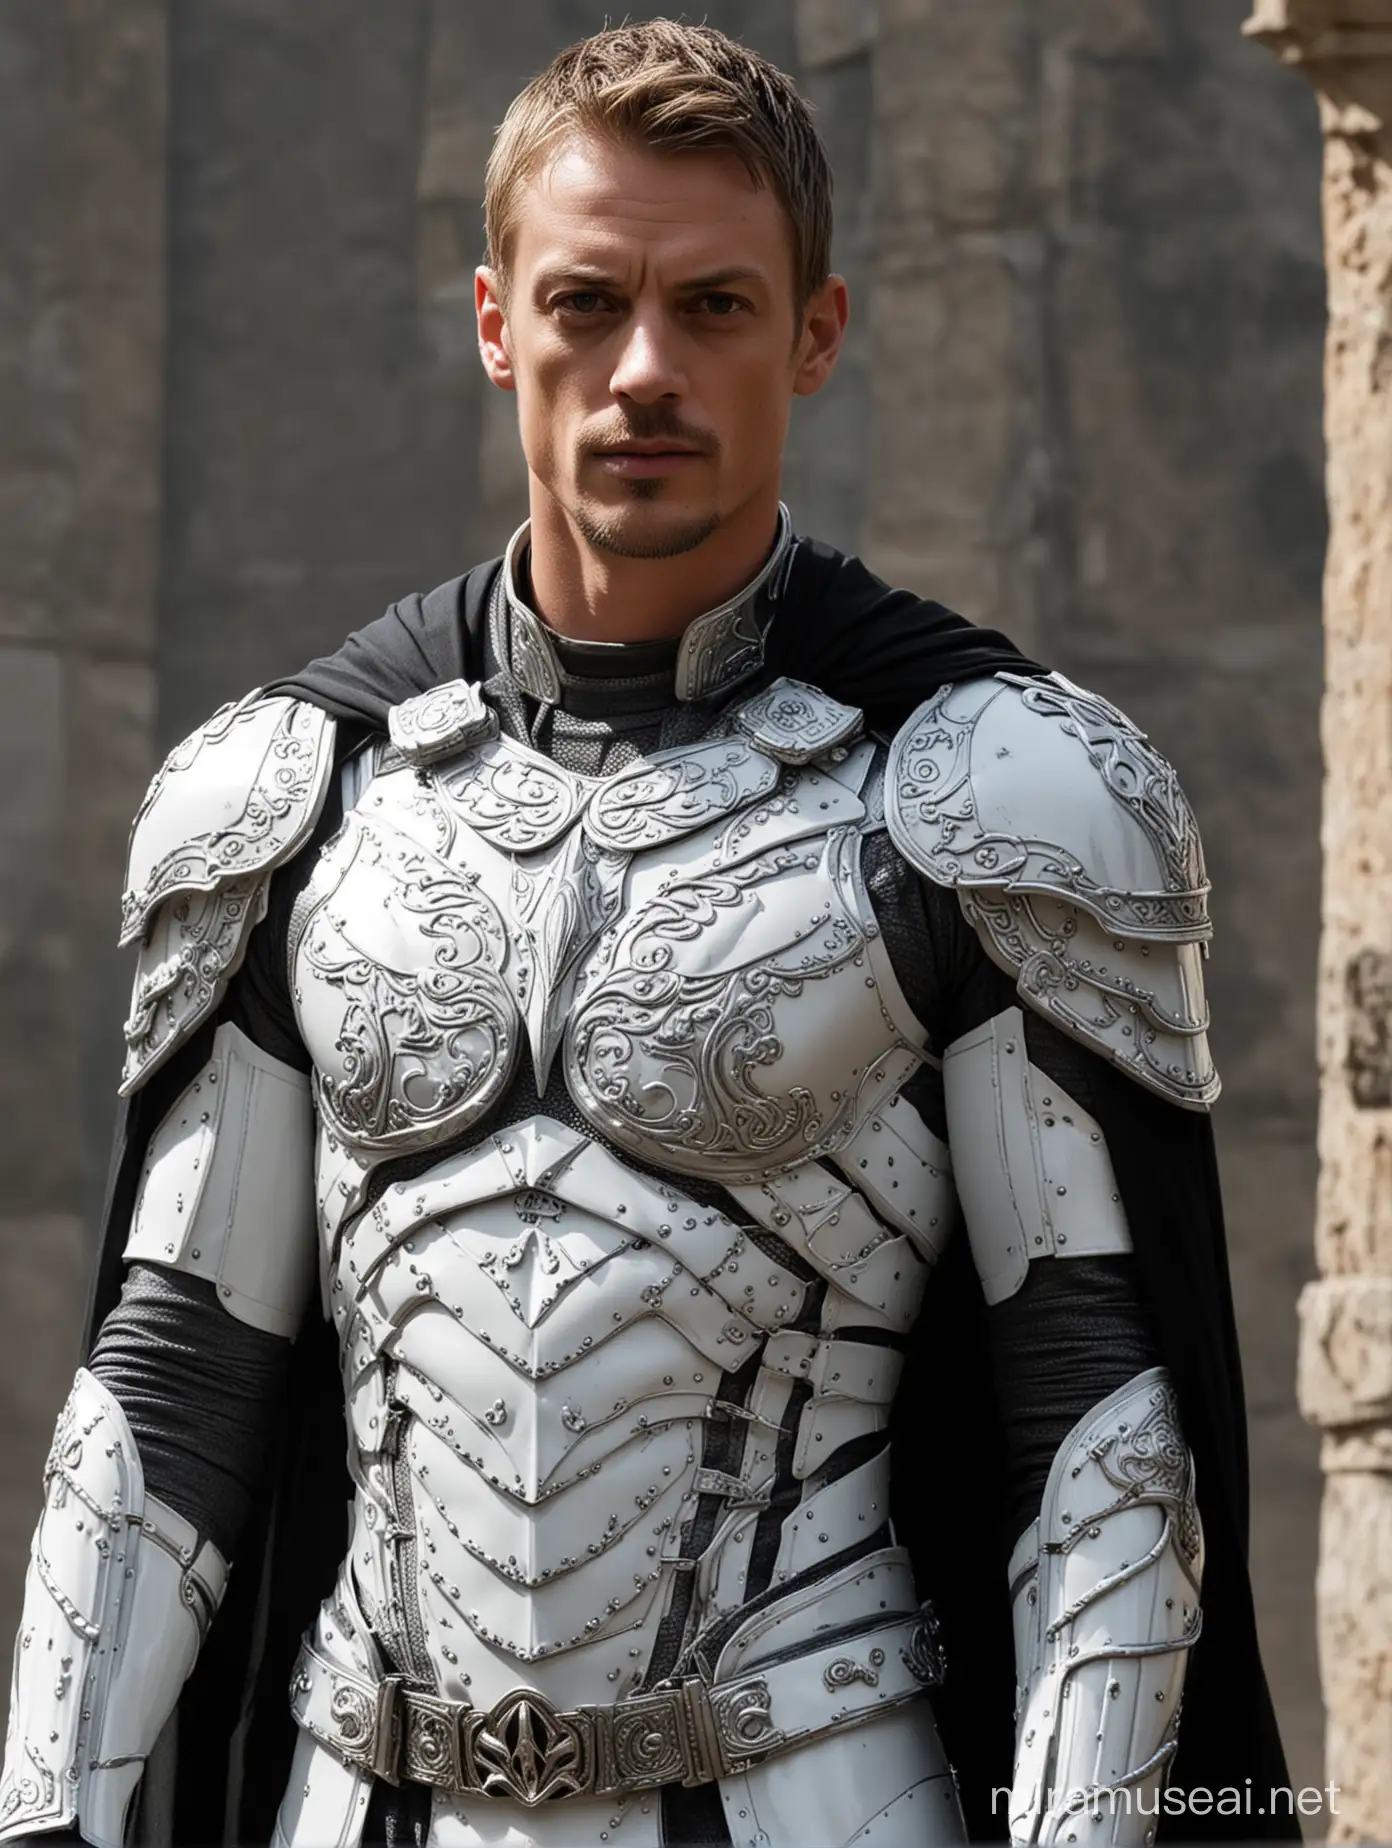 Joel Kinnaman in White Armor with Silver Details and Black Cape